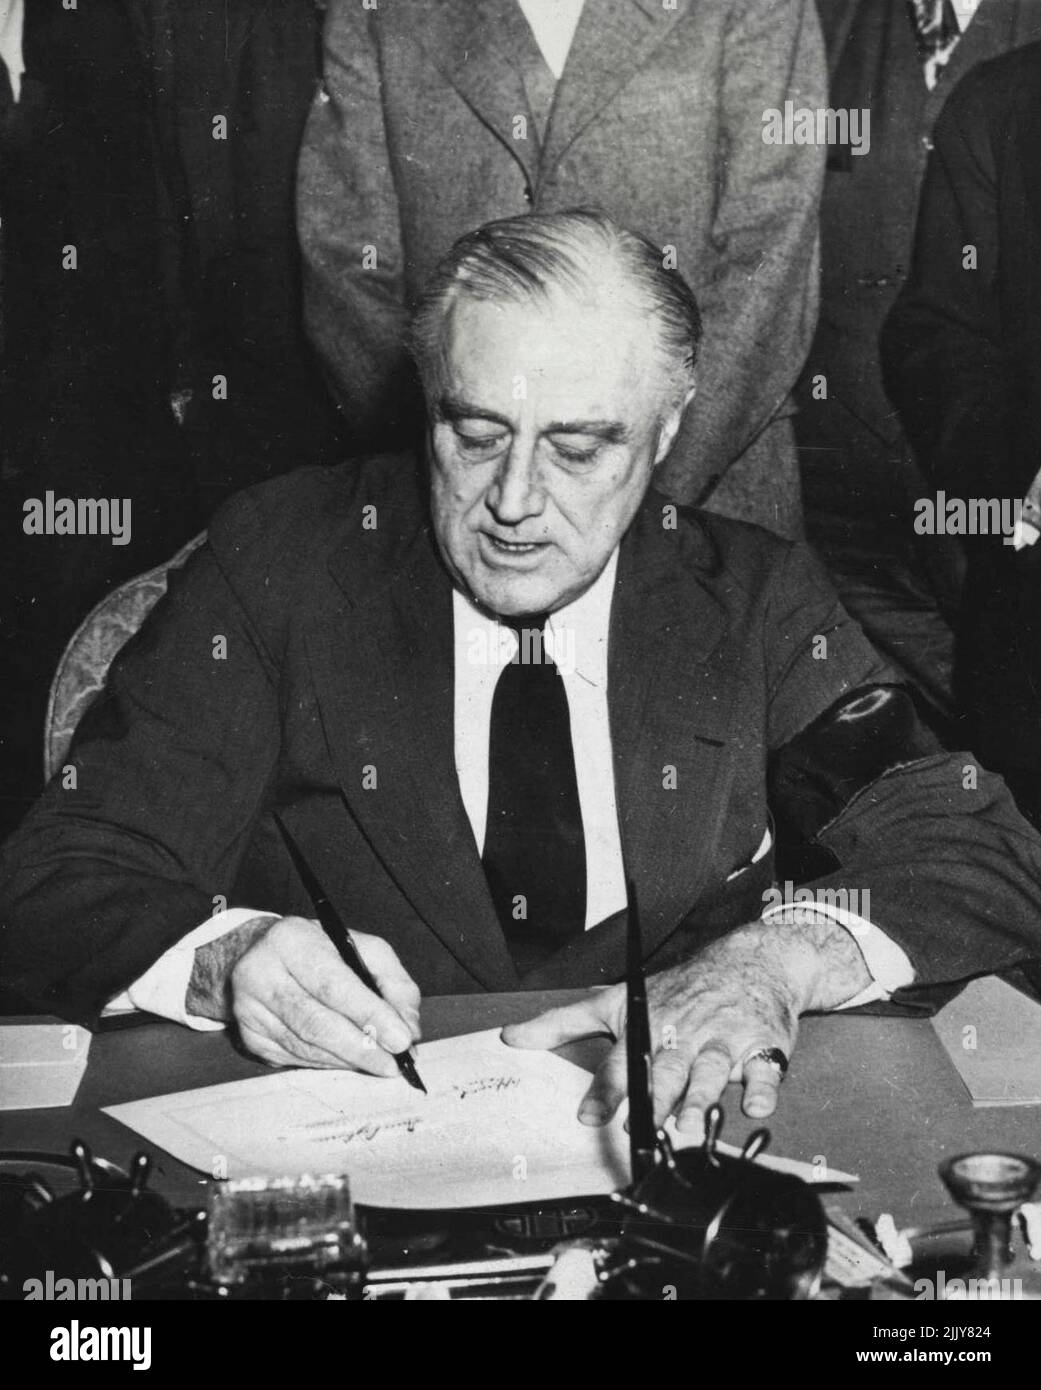 sevelt signs the declaration of war on Japan they day after Japanese forces attacked Pearl Harbor, Hawaii, on December 7, 1941. He was wearing a mourning band for his mother, the late Mrs. Sara Delano Roosevelt. In accepting the Democratic Party's renomination for the U.S. Presidency on July 20, 1944, President Roosevelt stated that one of the tasks before America in 1944 is to'....form world-wide organizations and to arrange to use the armed force of the sovereign nations of the world to make be the Republican Party's nominee. April 14, 1945. (Photo by U.S. Office of War Information Picture). Stock Photo